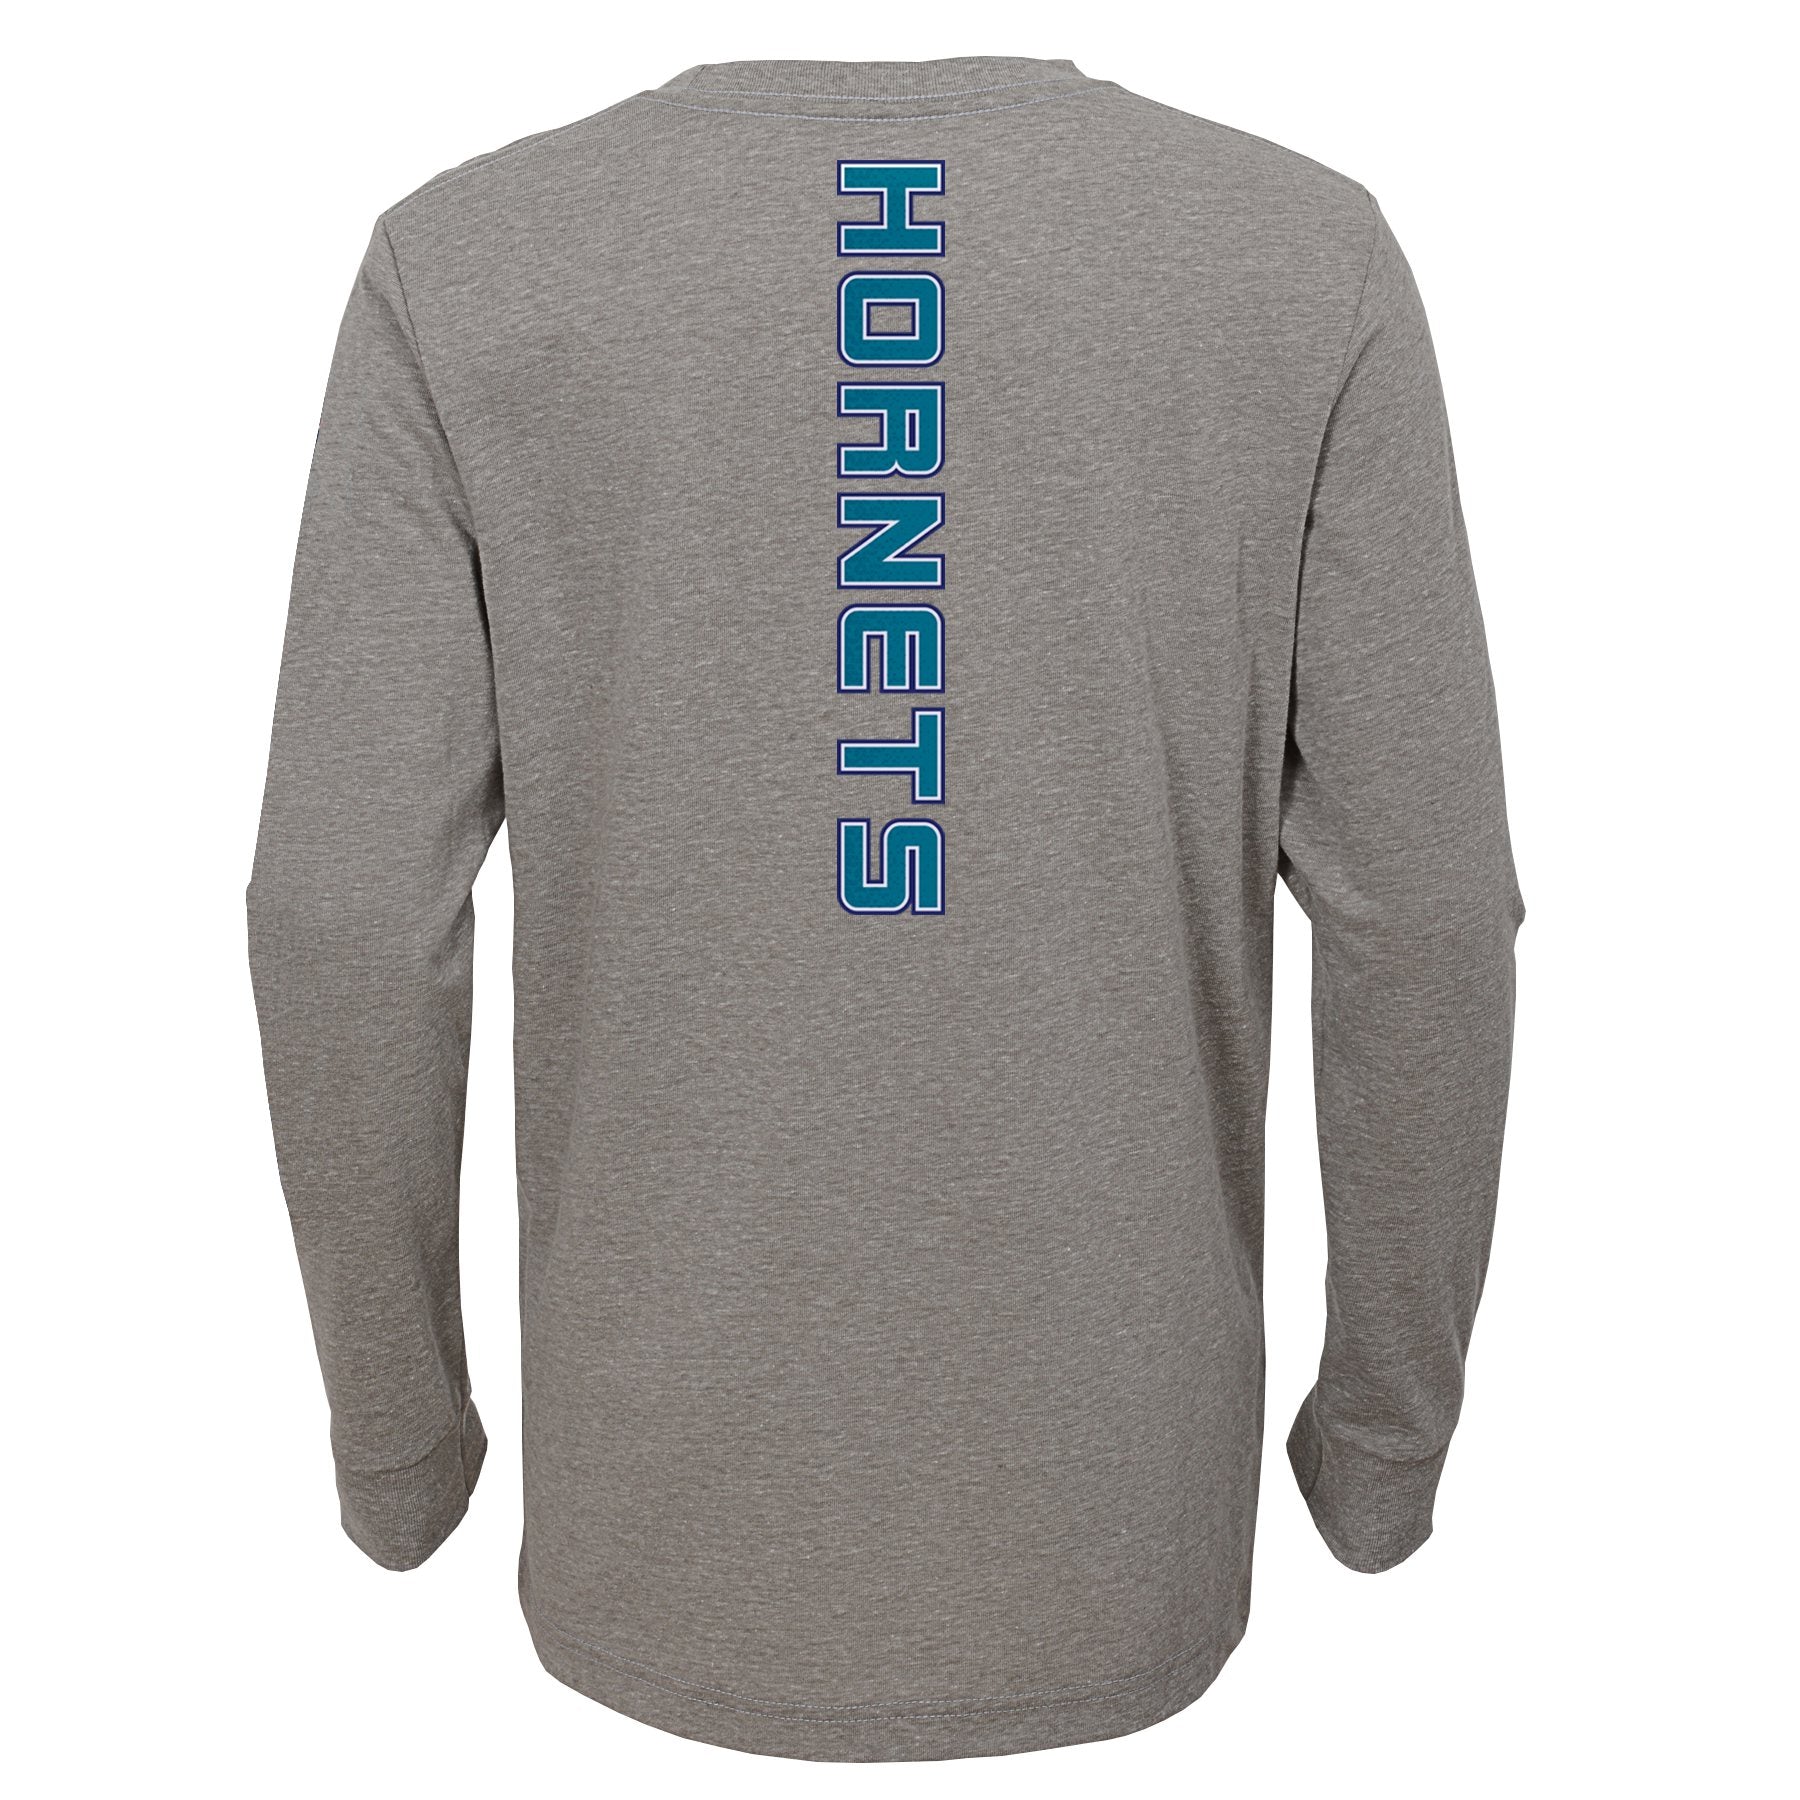 Outerstuff NBA Youth (4-18) Charlotte Hornets Heather Grey Long Sleeve Tee